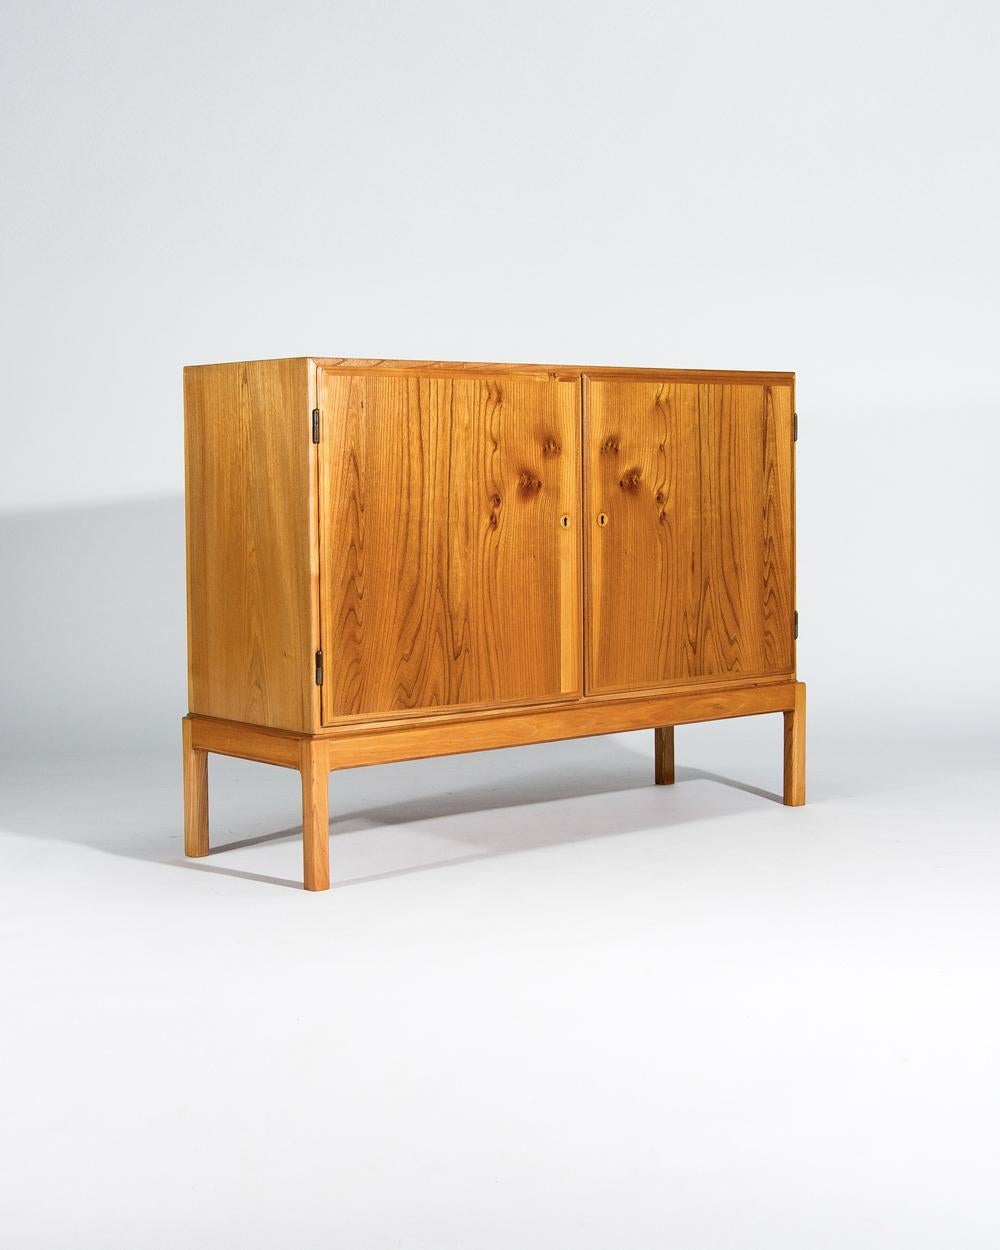 An early sideboard in elm with adjustable pine drawers designed by Borge Mogensen and manufactured by FDB Mobler in the 1940s.

A rare early example of Borge Mogensen’s work a beautiful sideboard crafted in elm. Elm is rarely used in furniture